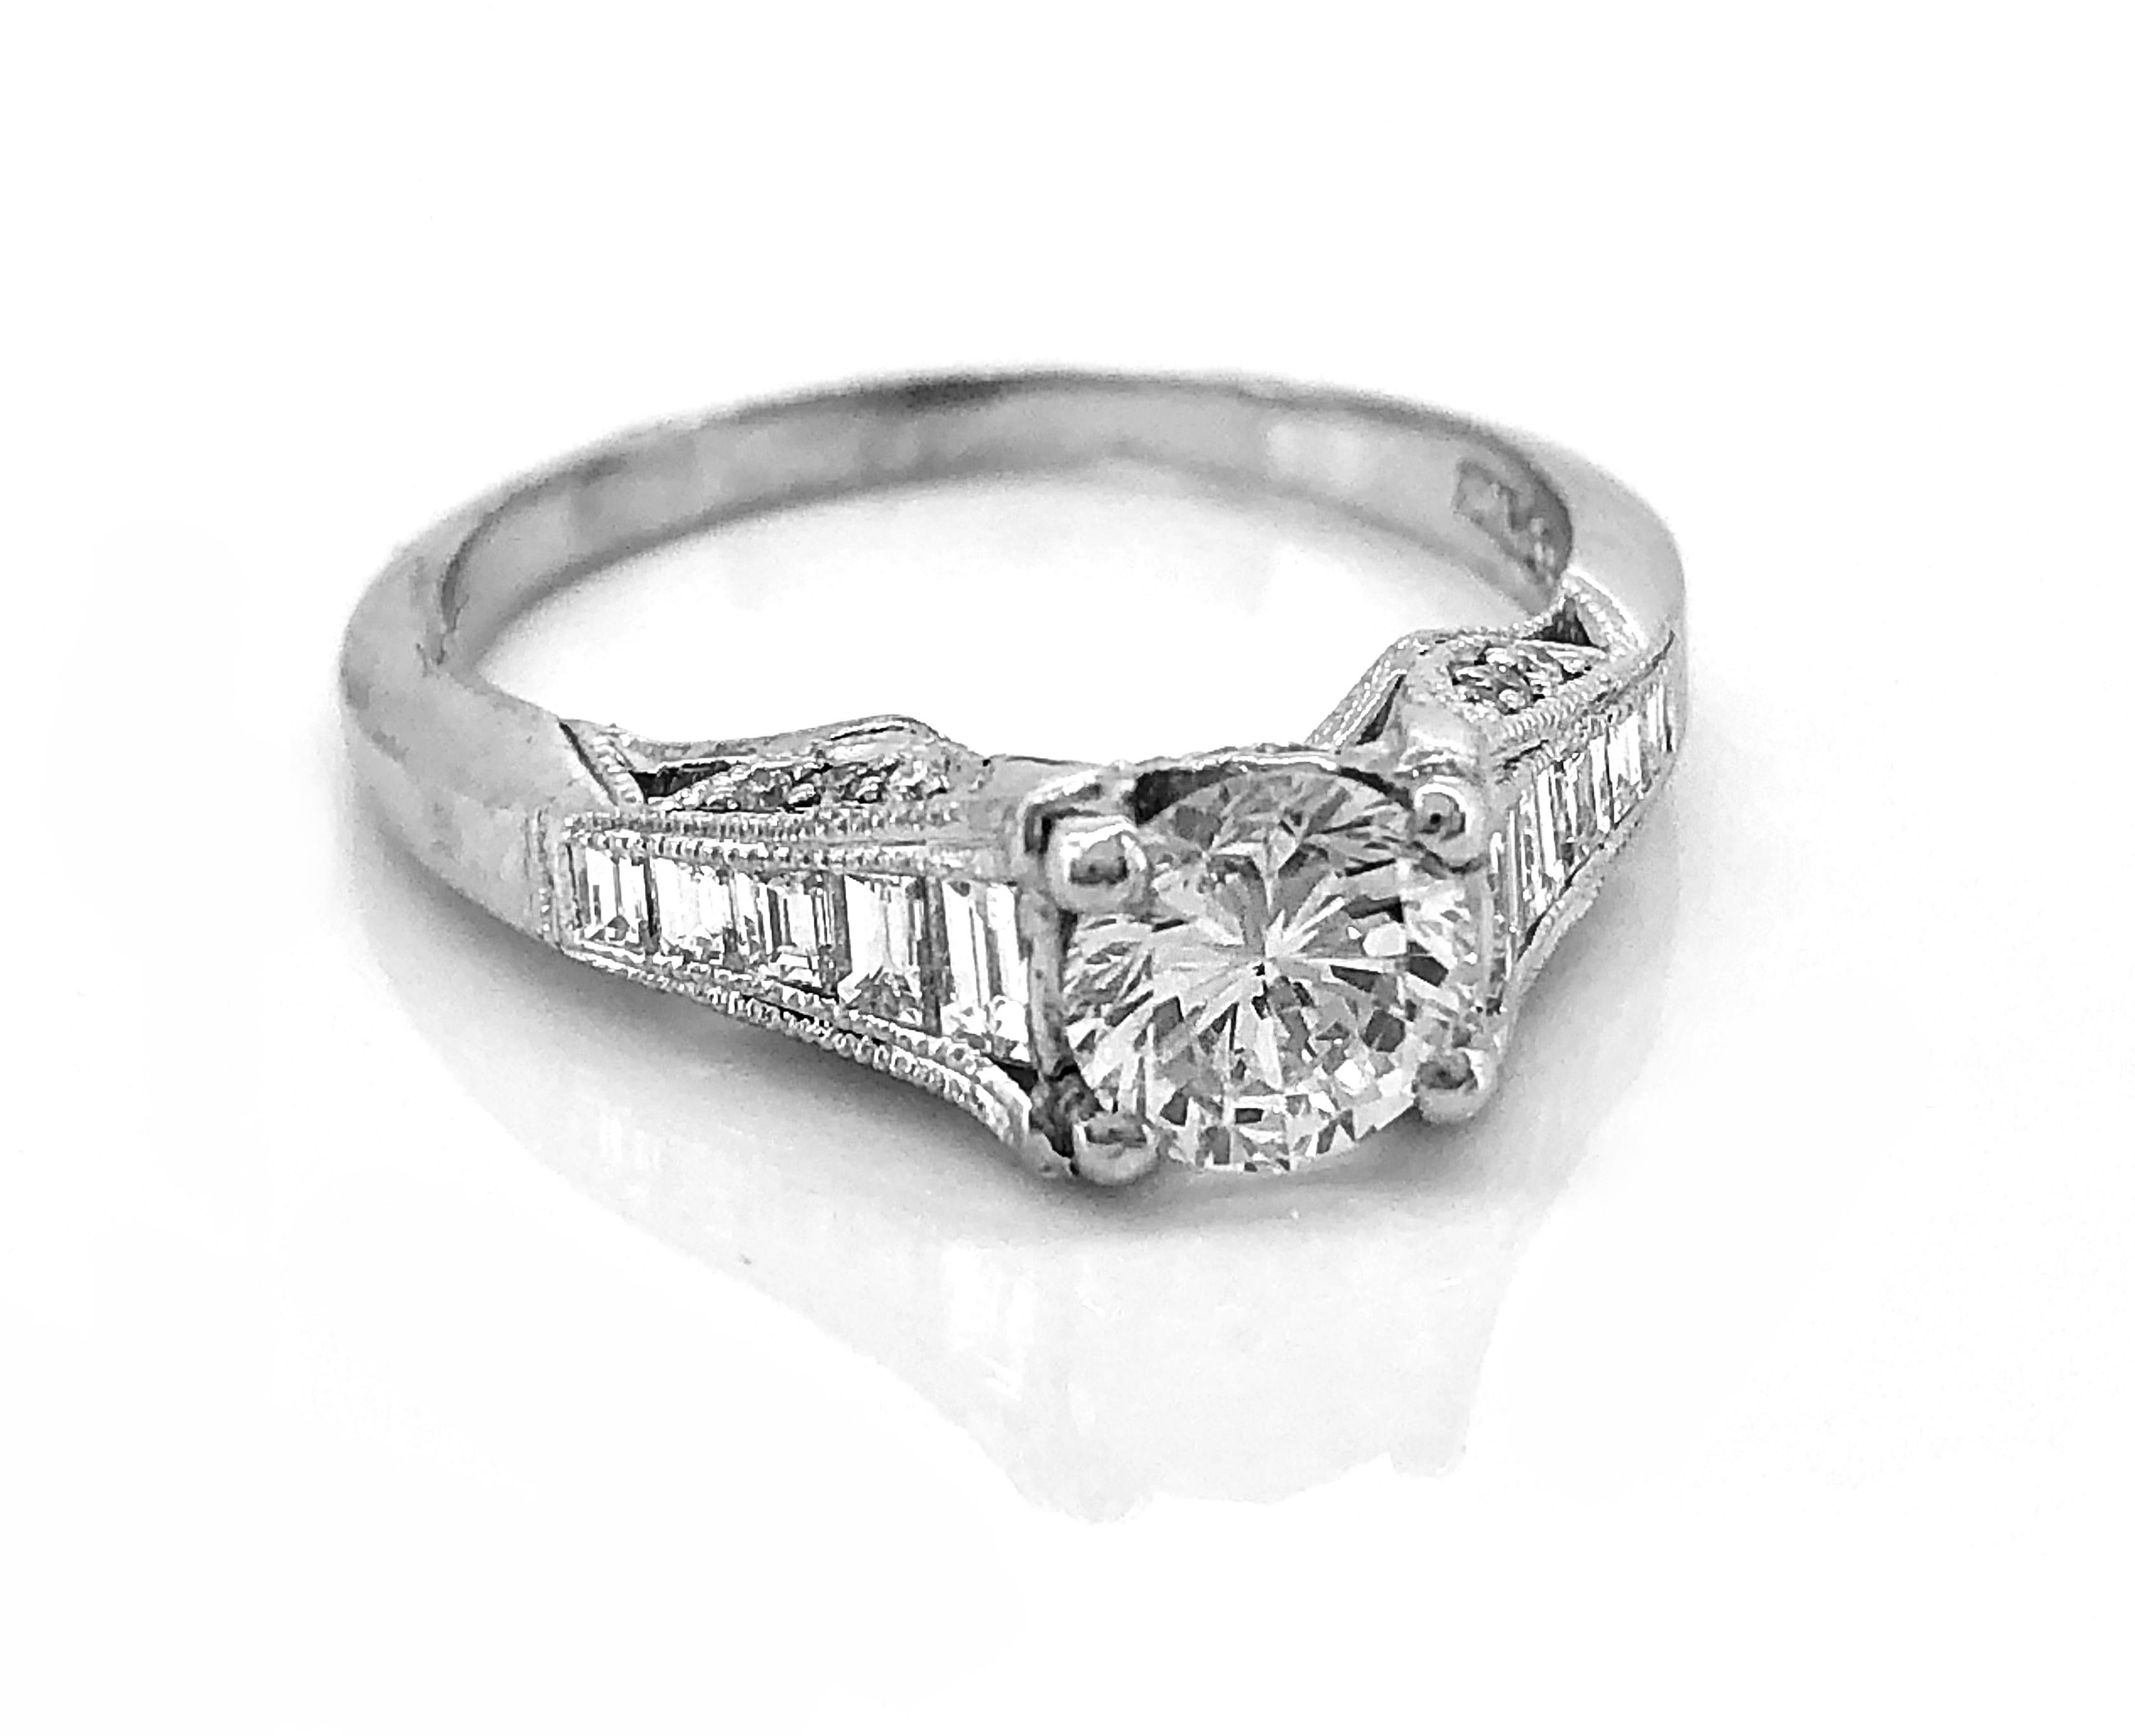 From the world renowned Tacori Company, this platinum engagement ring features a .73ct. apx. round brilliant diamond with excellent quality and has VS1 clarity and F color. The accenting diamonds, both emerald and round brilliant cut melee, weigh